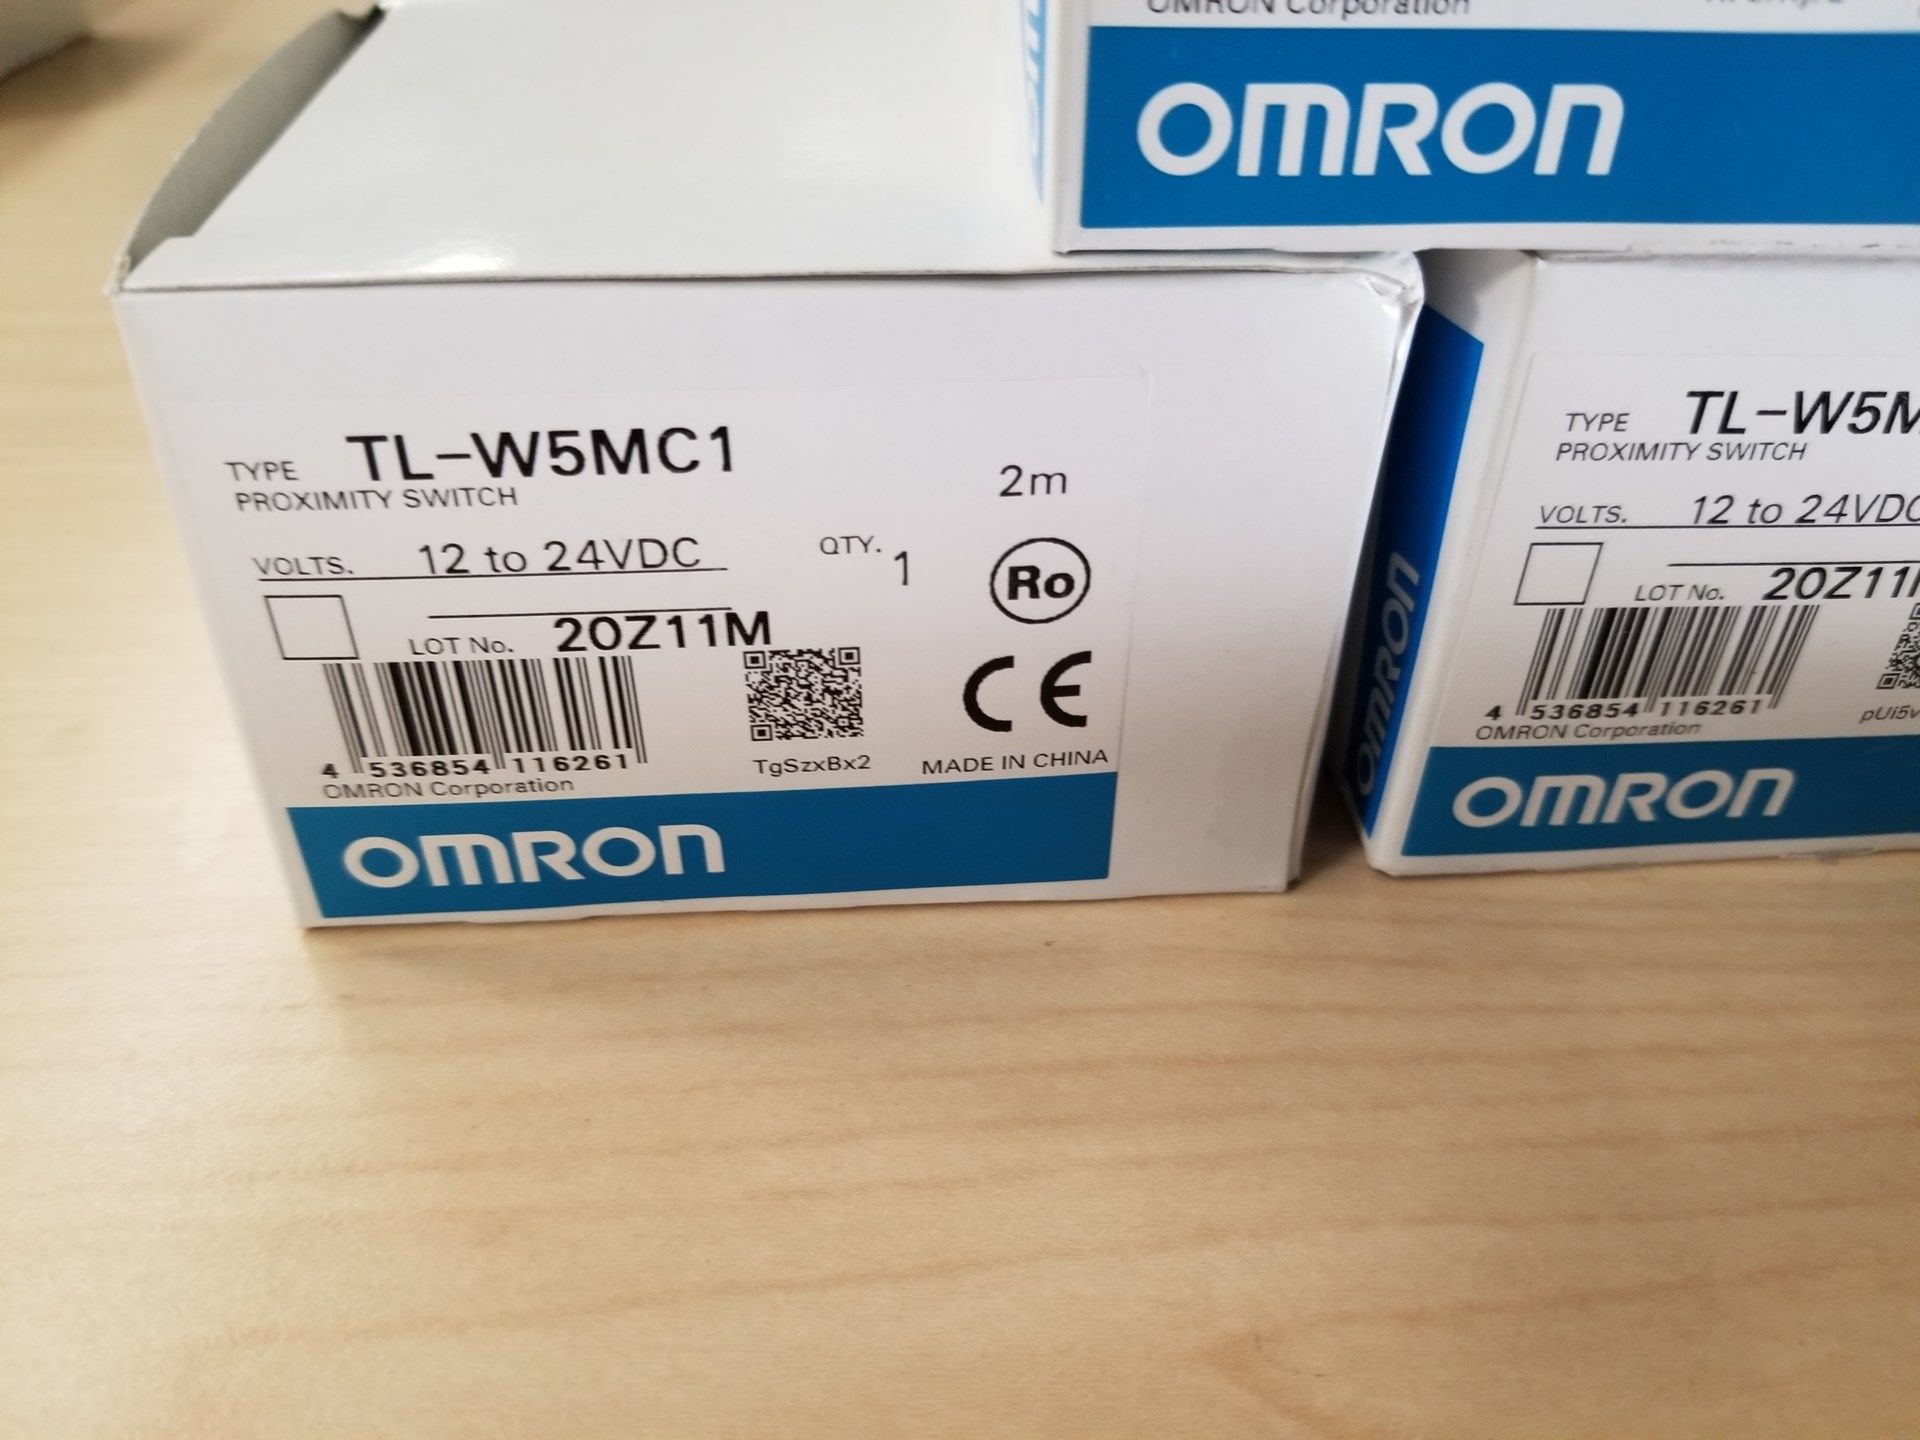 LOT OF 3 NEW OMRON TL-W5MC1 PROXIMITY SWITCHES/SENSORS - Image 2 of 3